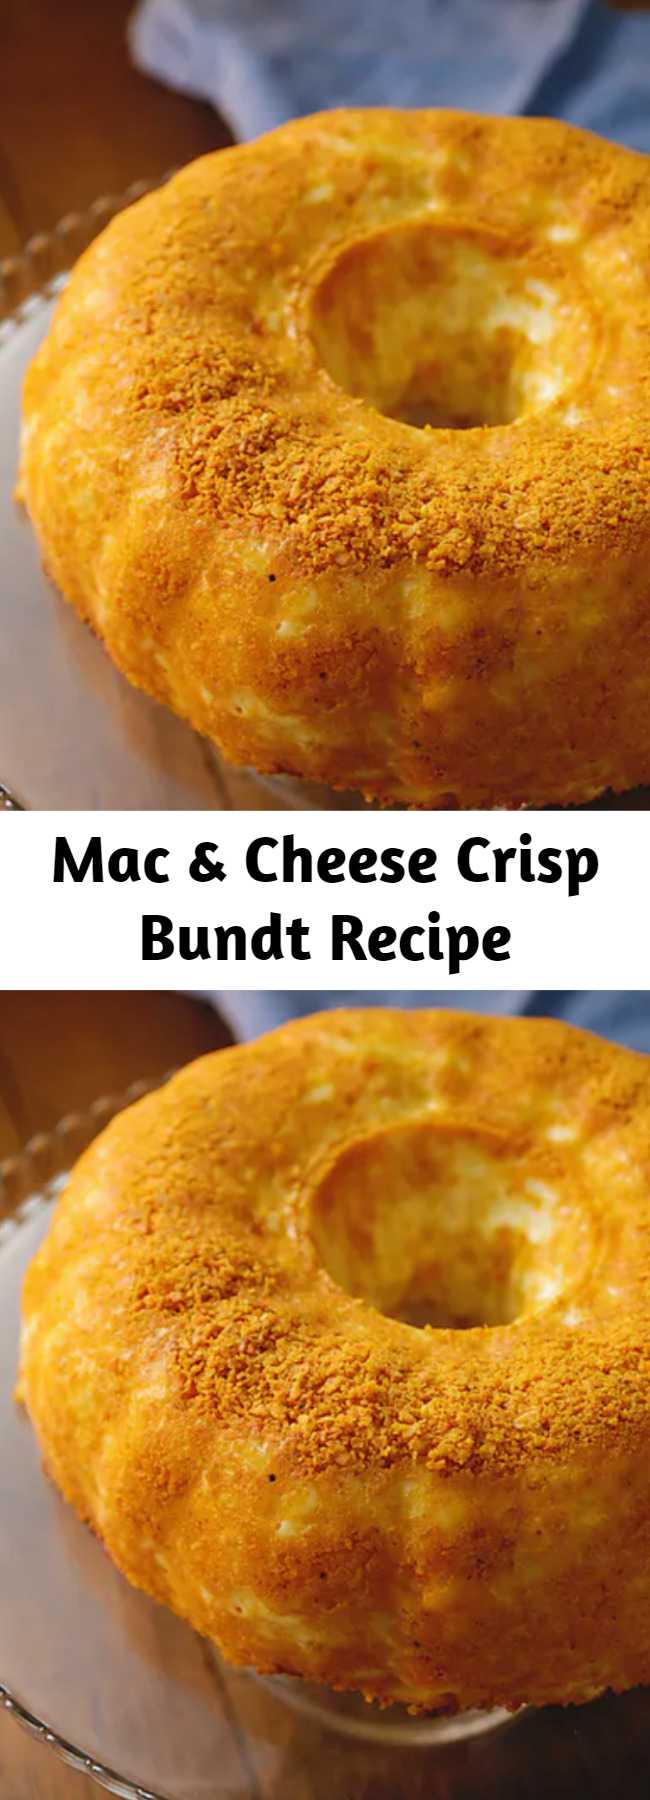 Mac & Cheese Crisp Bundt Recipe - For all the savoury lovers out there, we've made your perfect birthday cake! Mac and cheese with an extra layer of cheese surrounded in a crispy Dorito shell... Talk about a perfect cake.